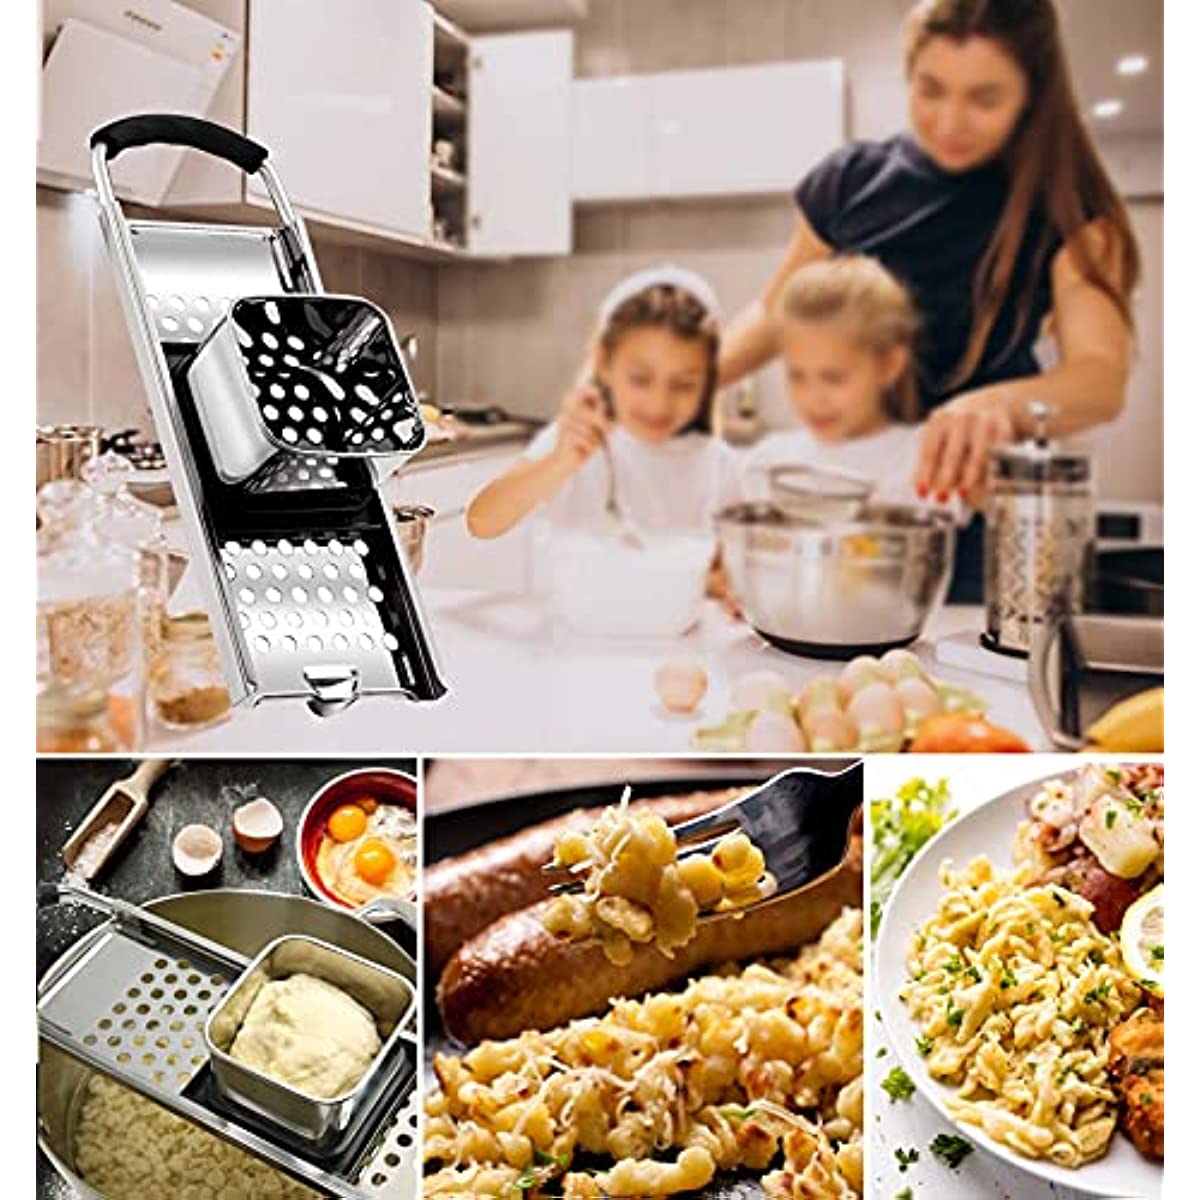 1pc comfortable stainless steel spaetzle maker with safety pusher and rubber grip handle perfect for making noodles and dumplings